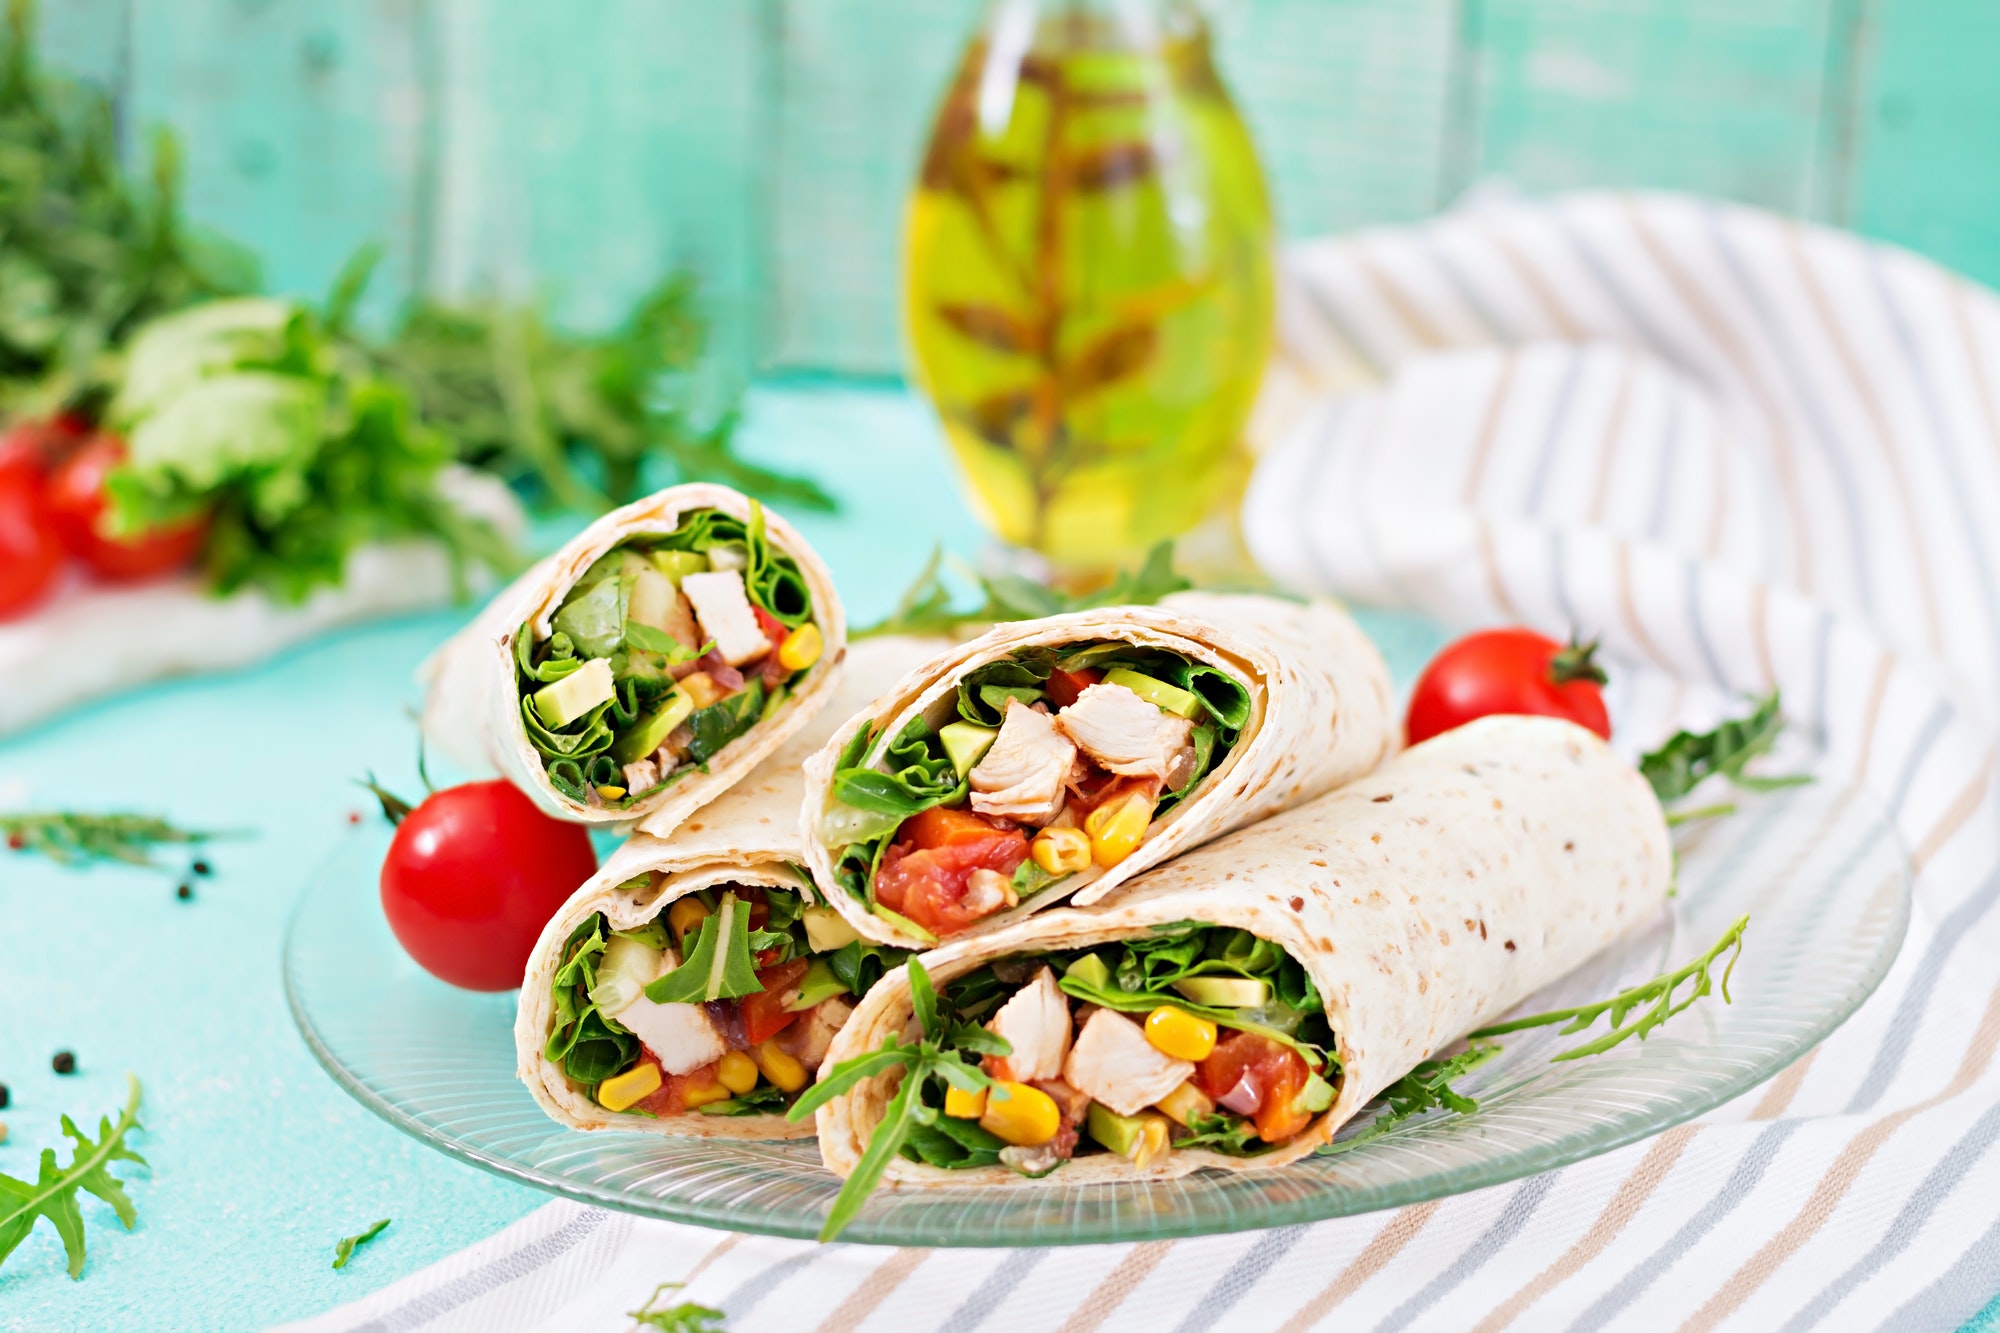 Burritos wraps with chicken and vegetables on light background. Chicken burrito, mexican food.